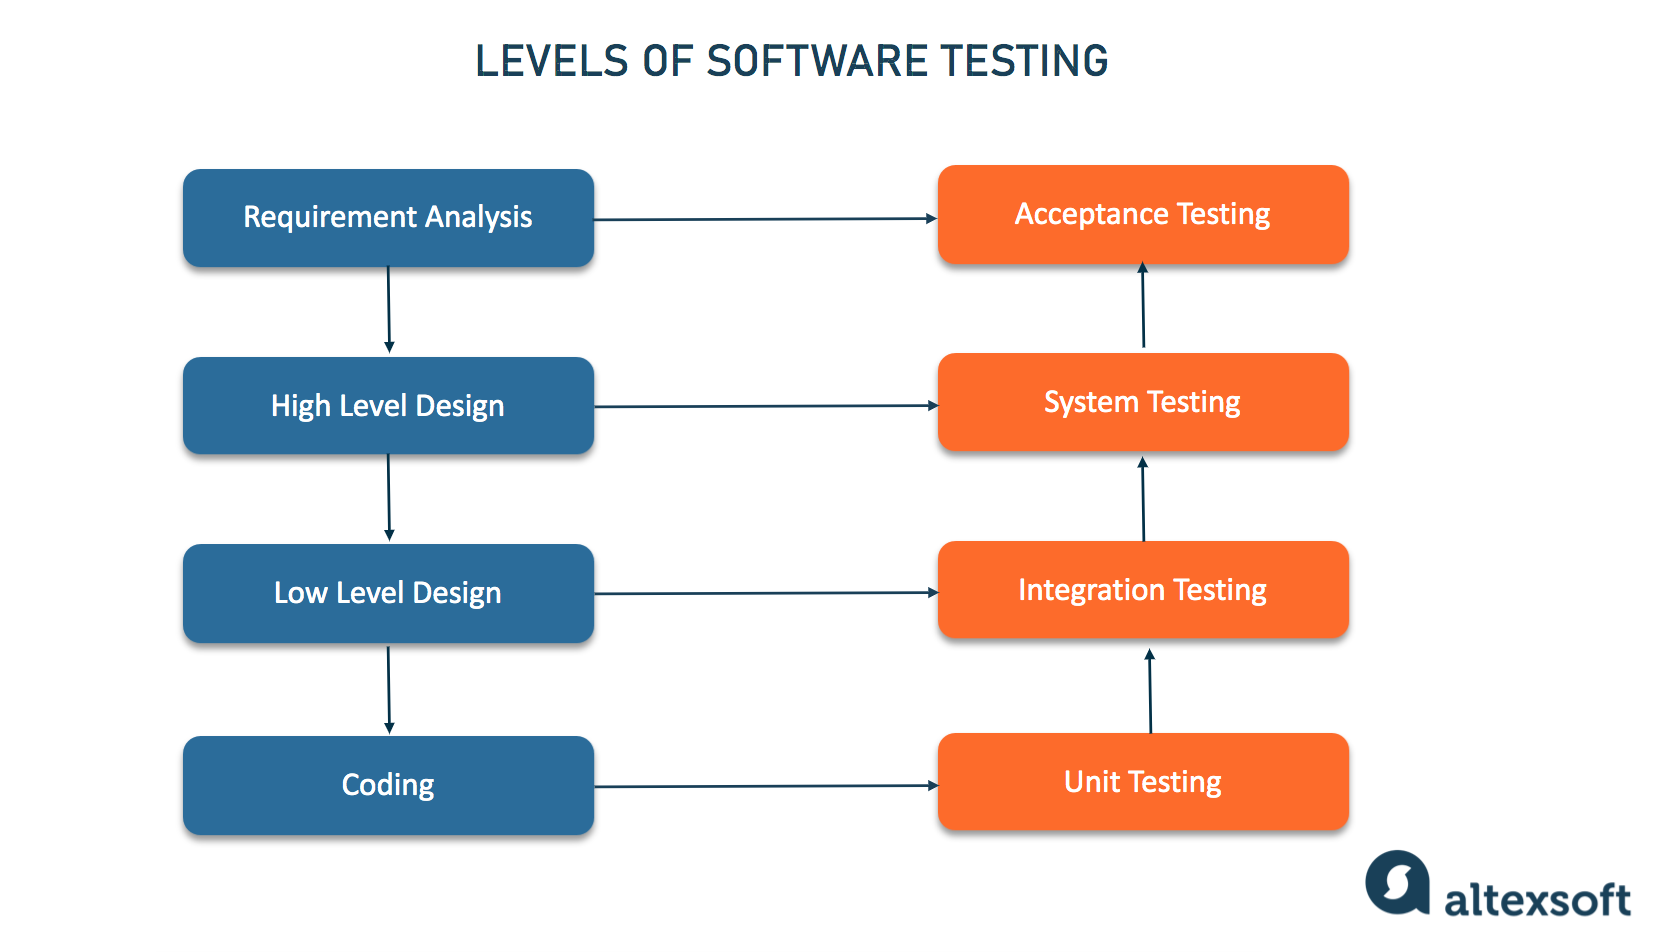 Acceptance testing is the high-level test performed on software